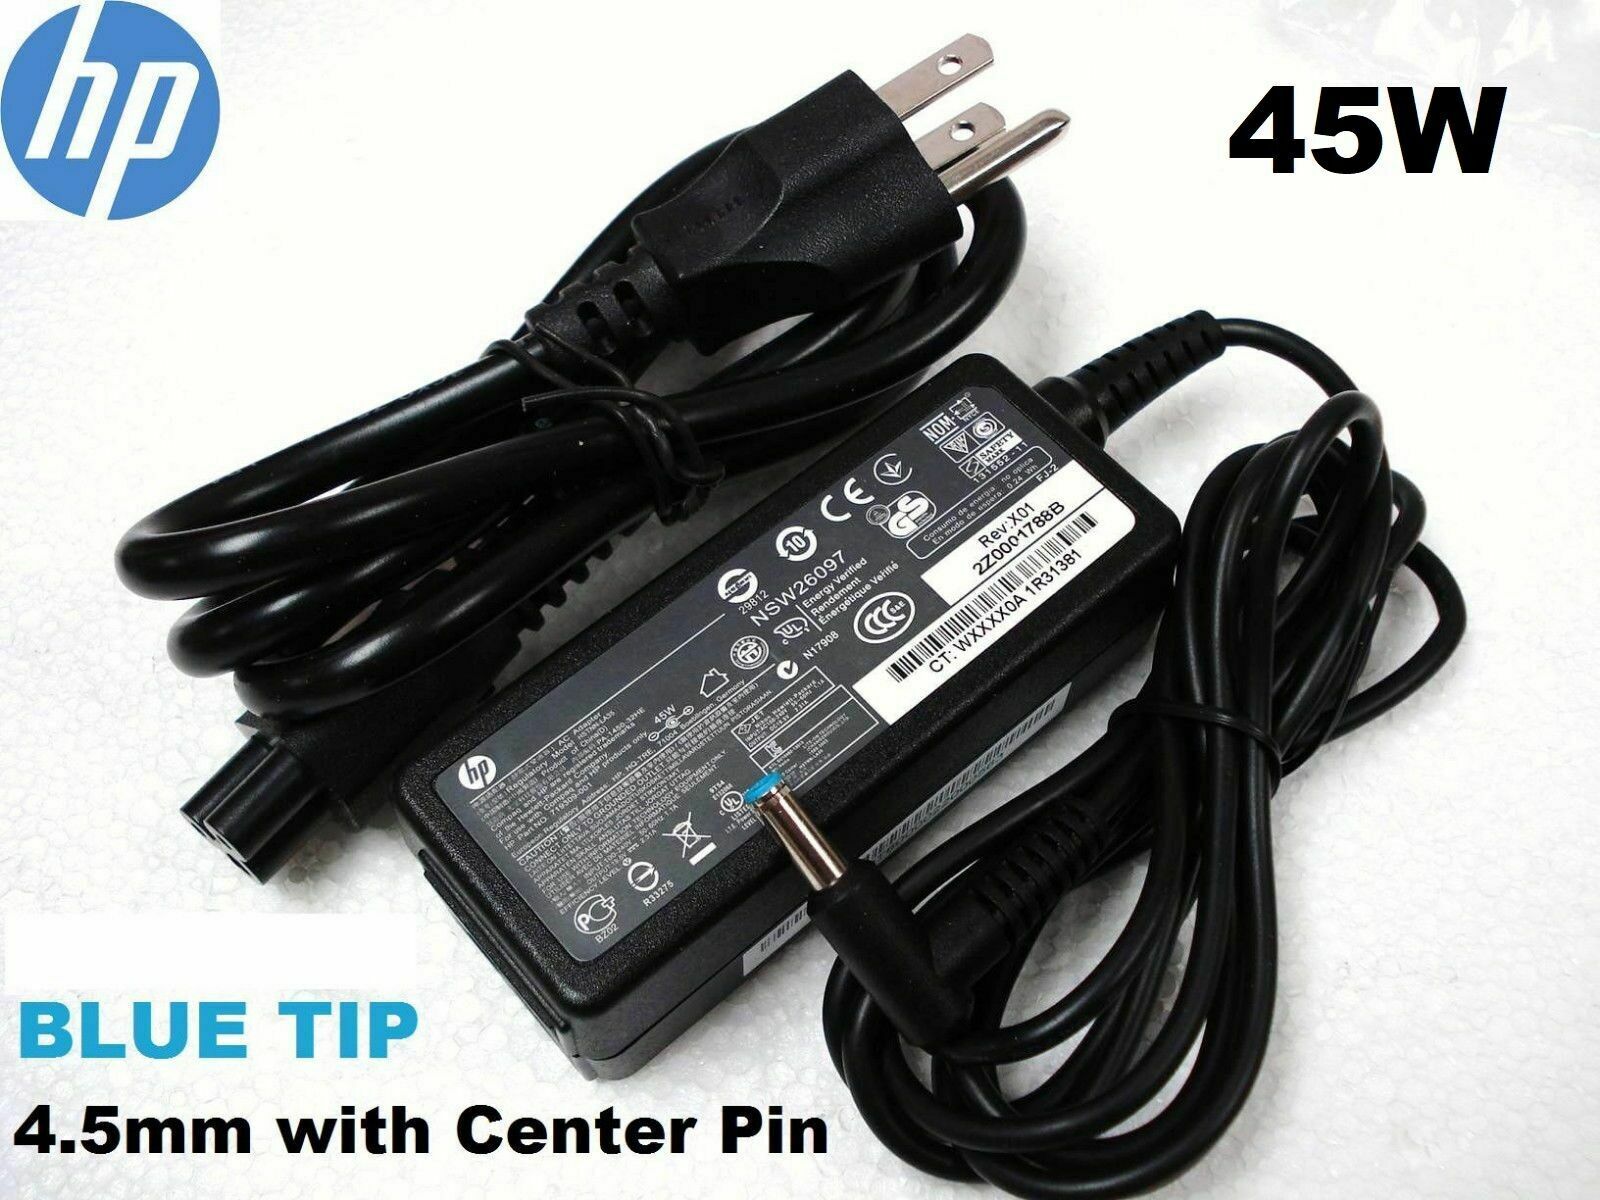 Genuine HP Laptop Charger AC Power Adapter 740015-002 741727-001 19.5V 2.31A 45W Compatible Brand: For HP Type: Power